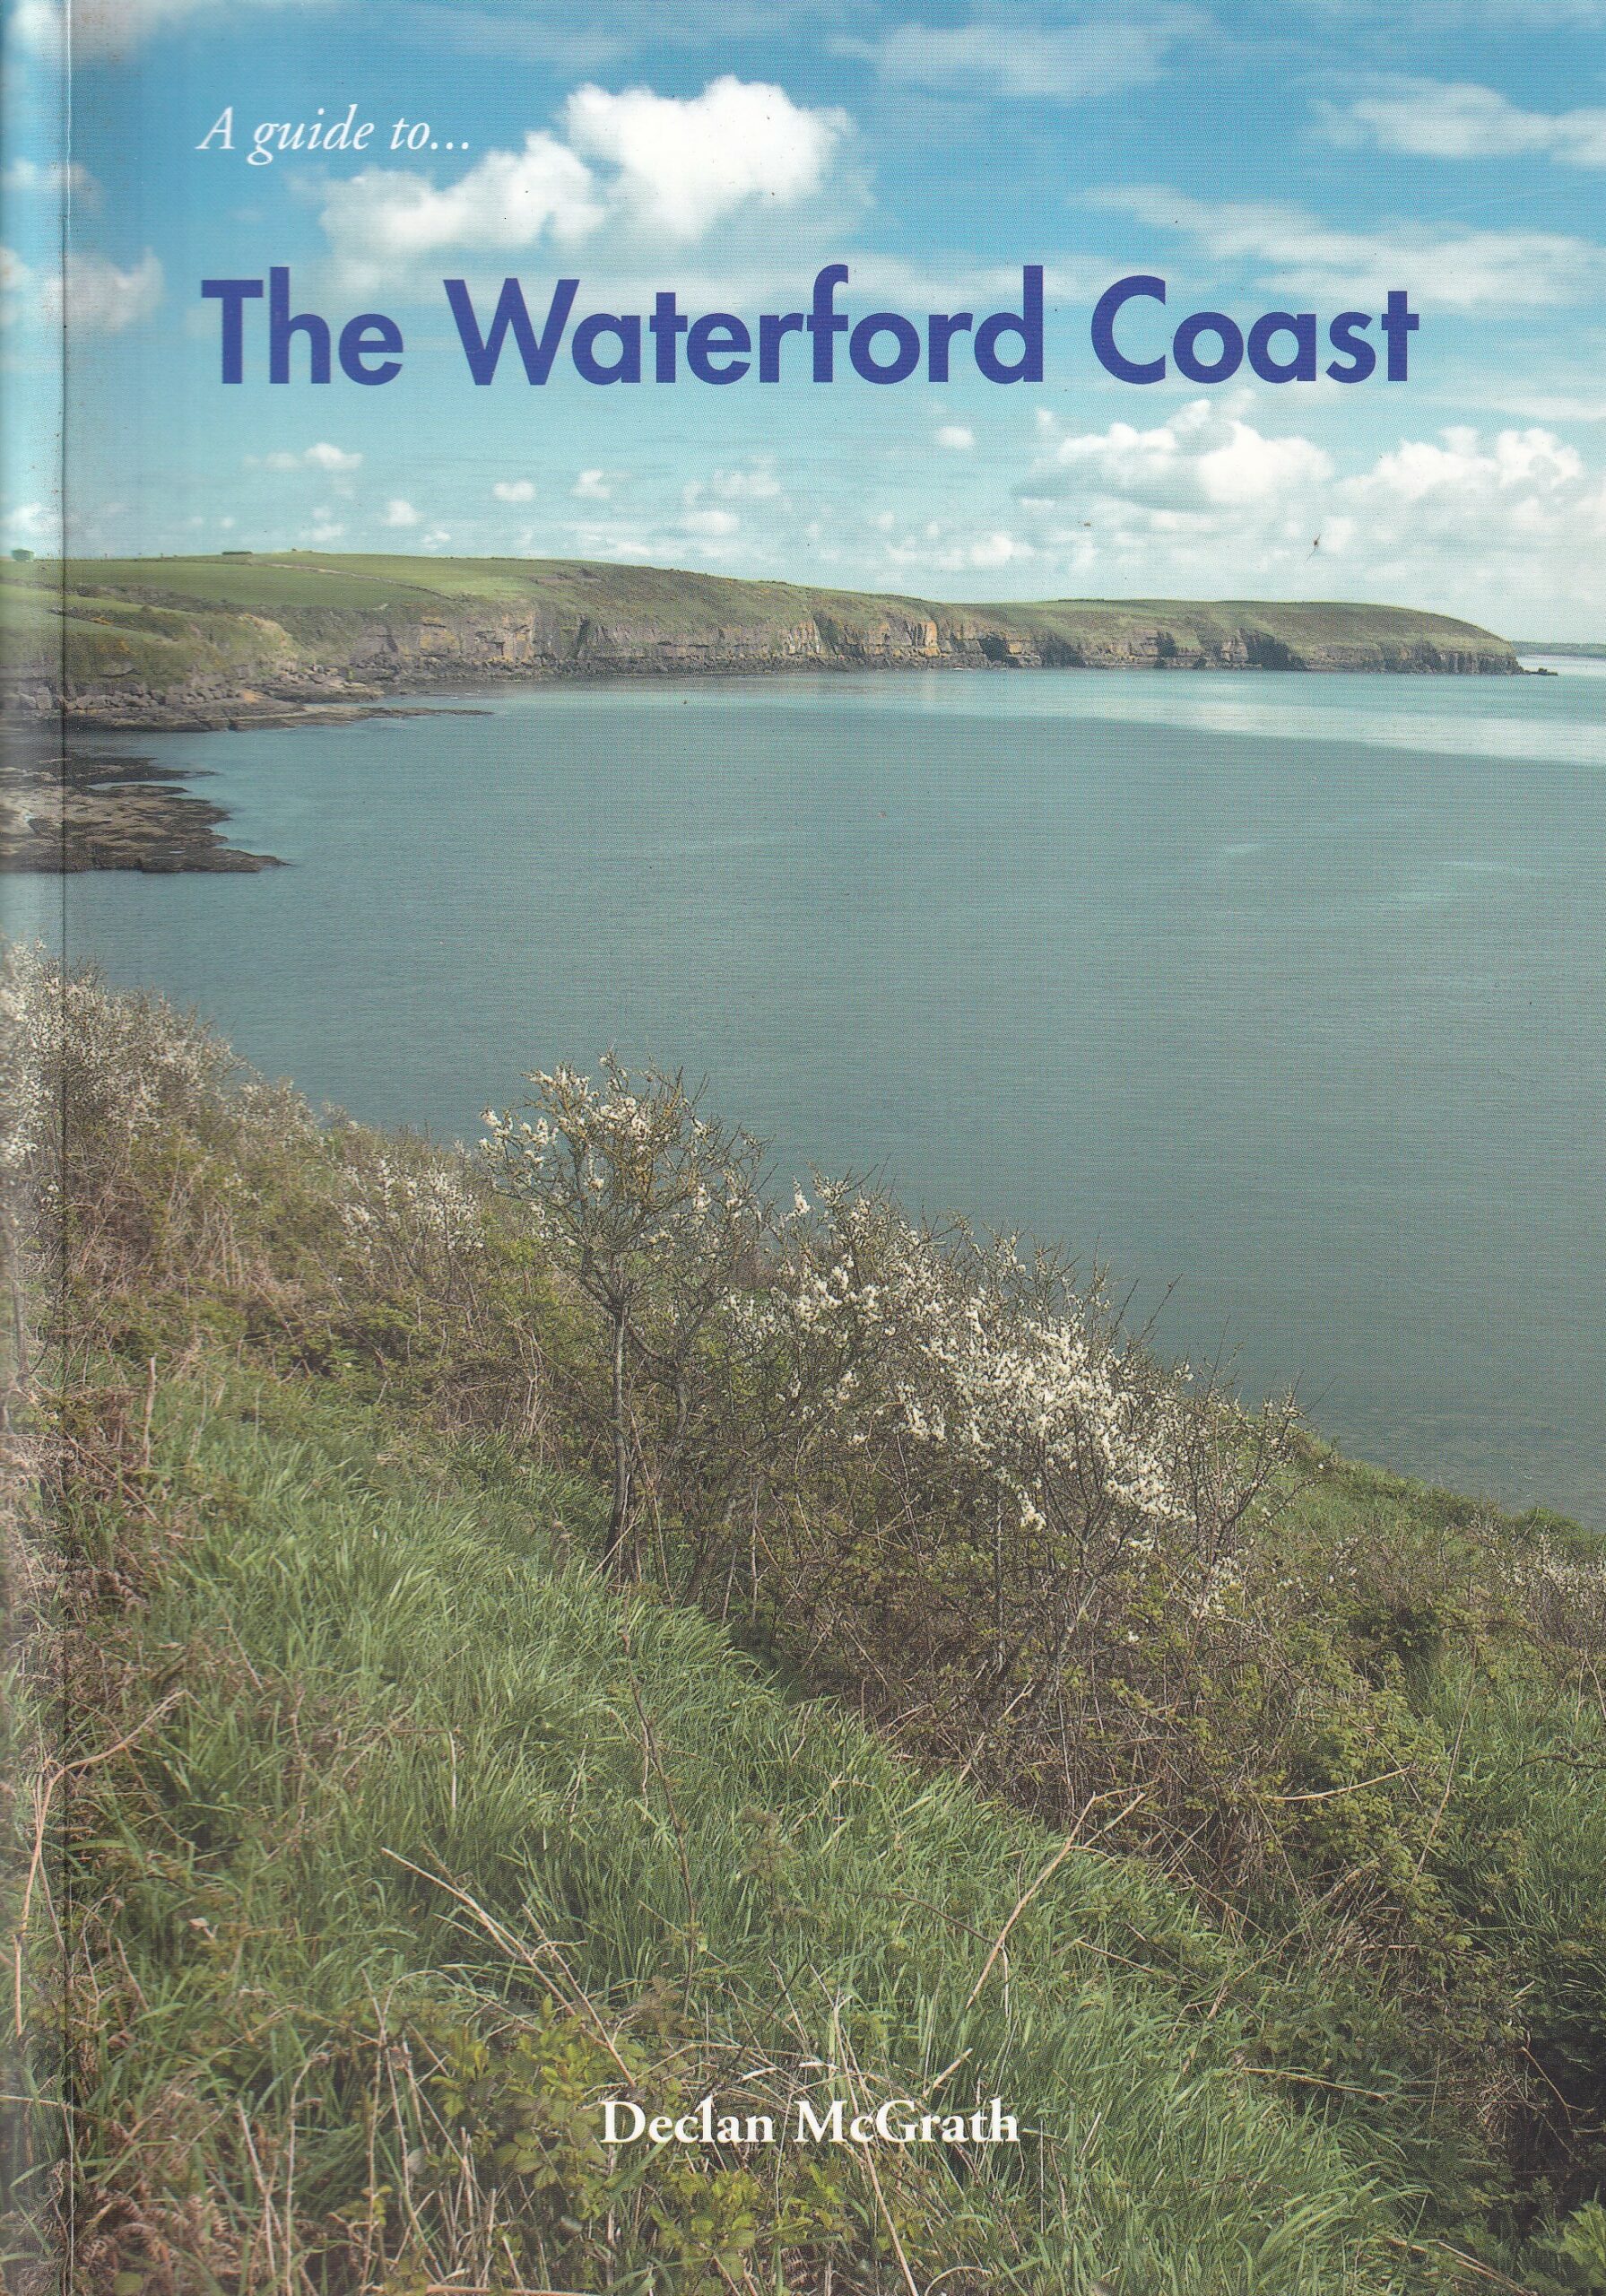 A Guide to the Waterford Coast | Declan Mcgrath | Charlie Byrne's